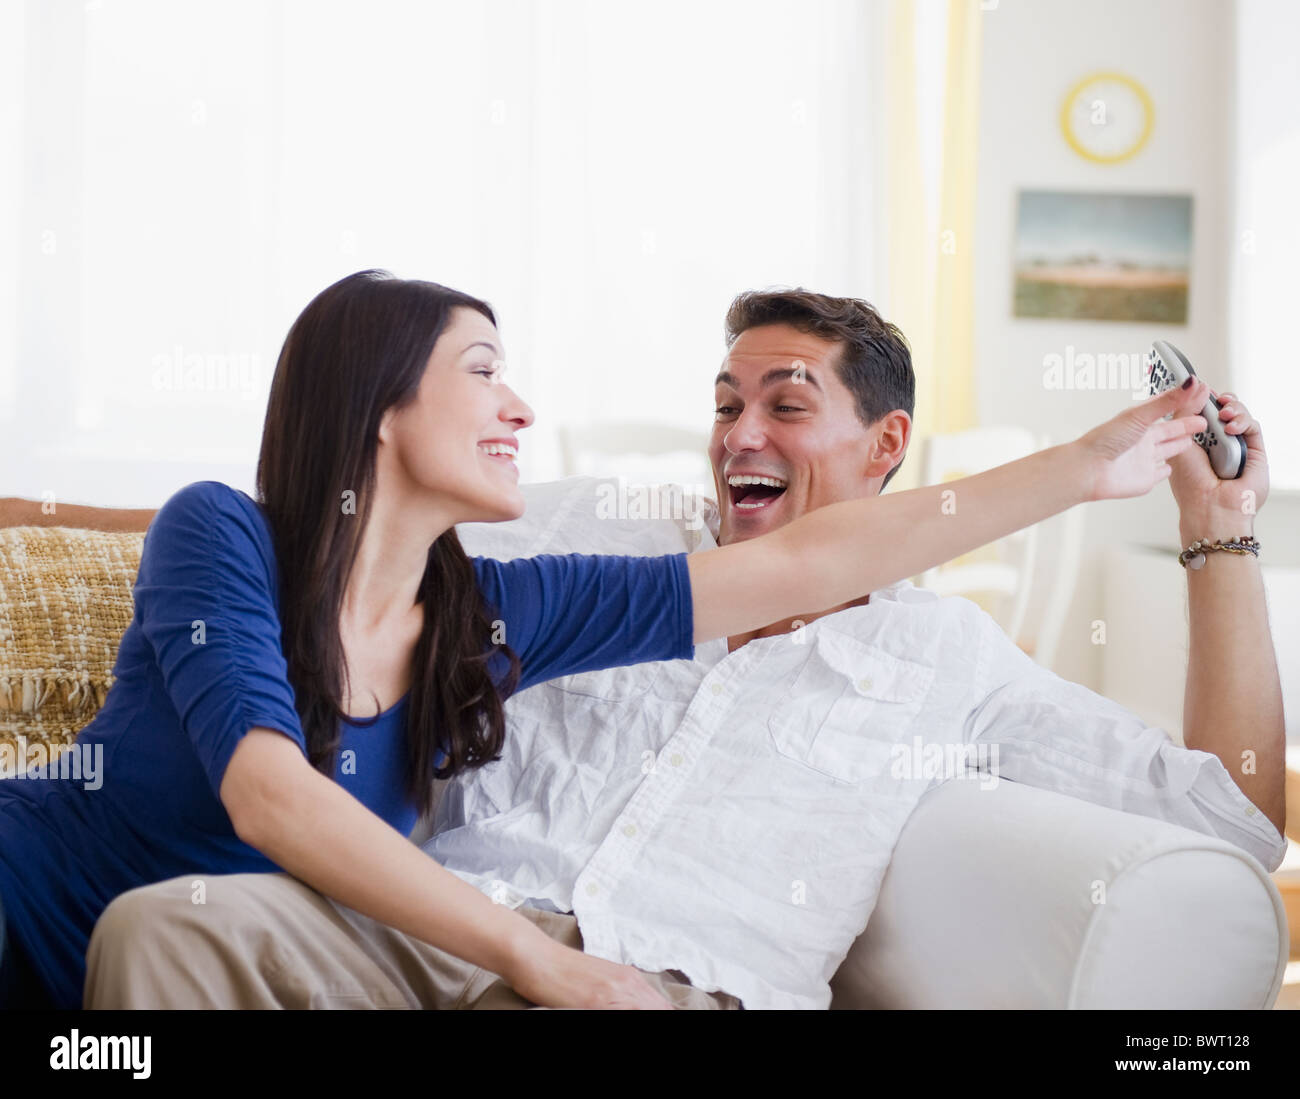 Laughing mixed race man keeping remote control away from wife Stock Photo